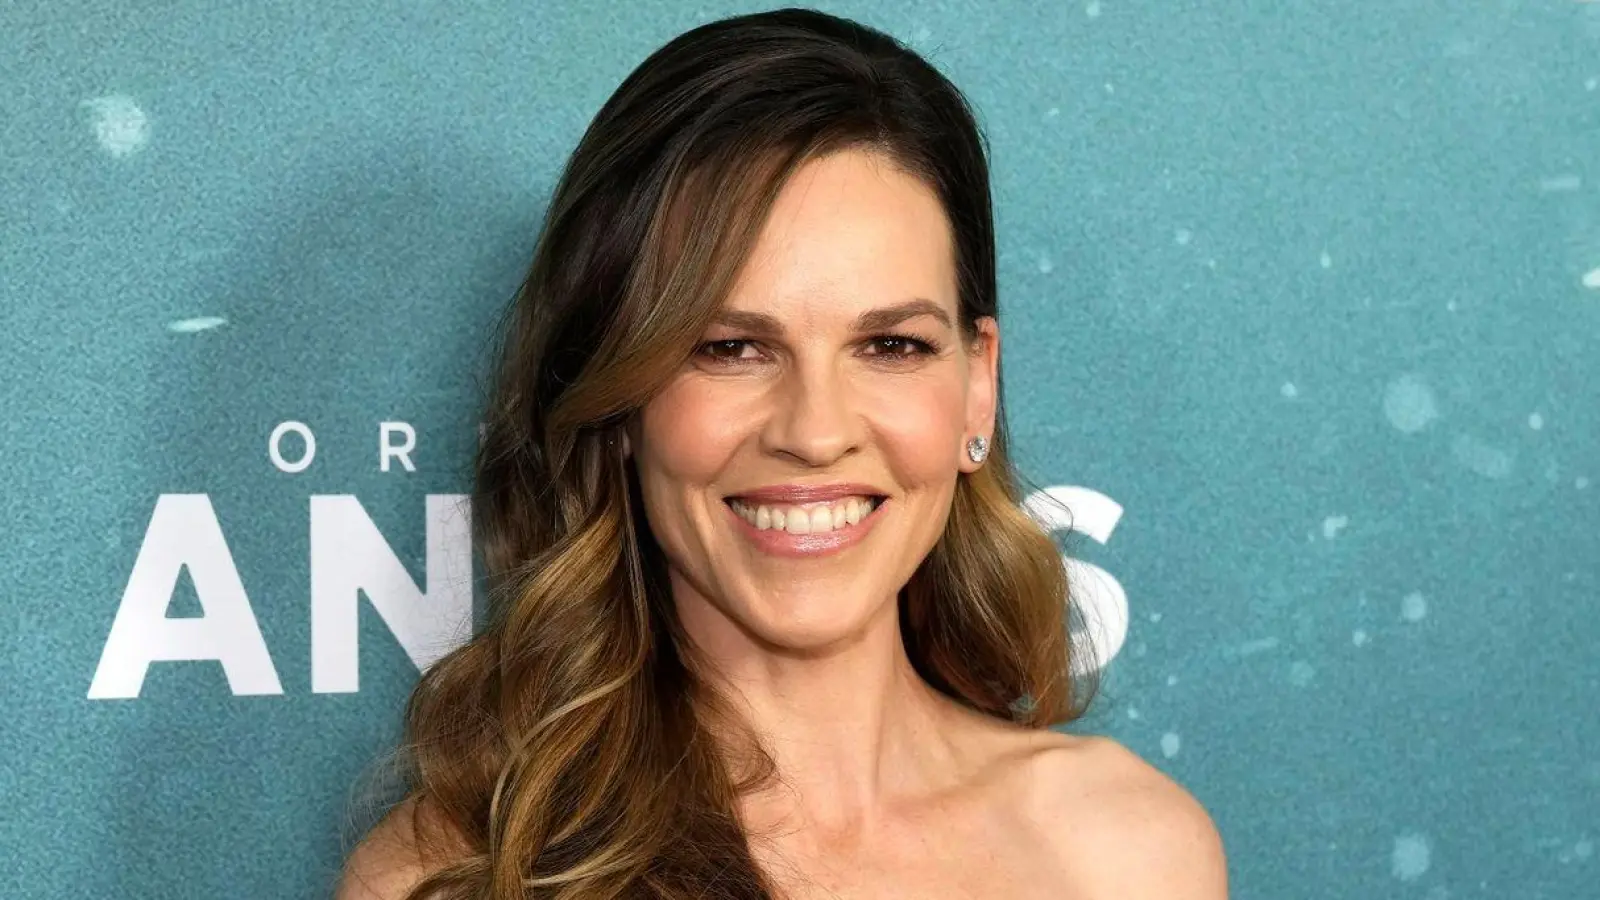 Hilary Swank bei der Premiere von „Ordinary Angels“ in New York. (Foto: Charles Sykes/Invision via AP/dpa)